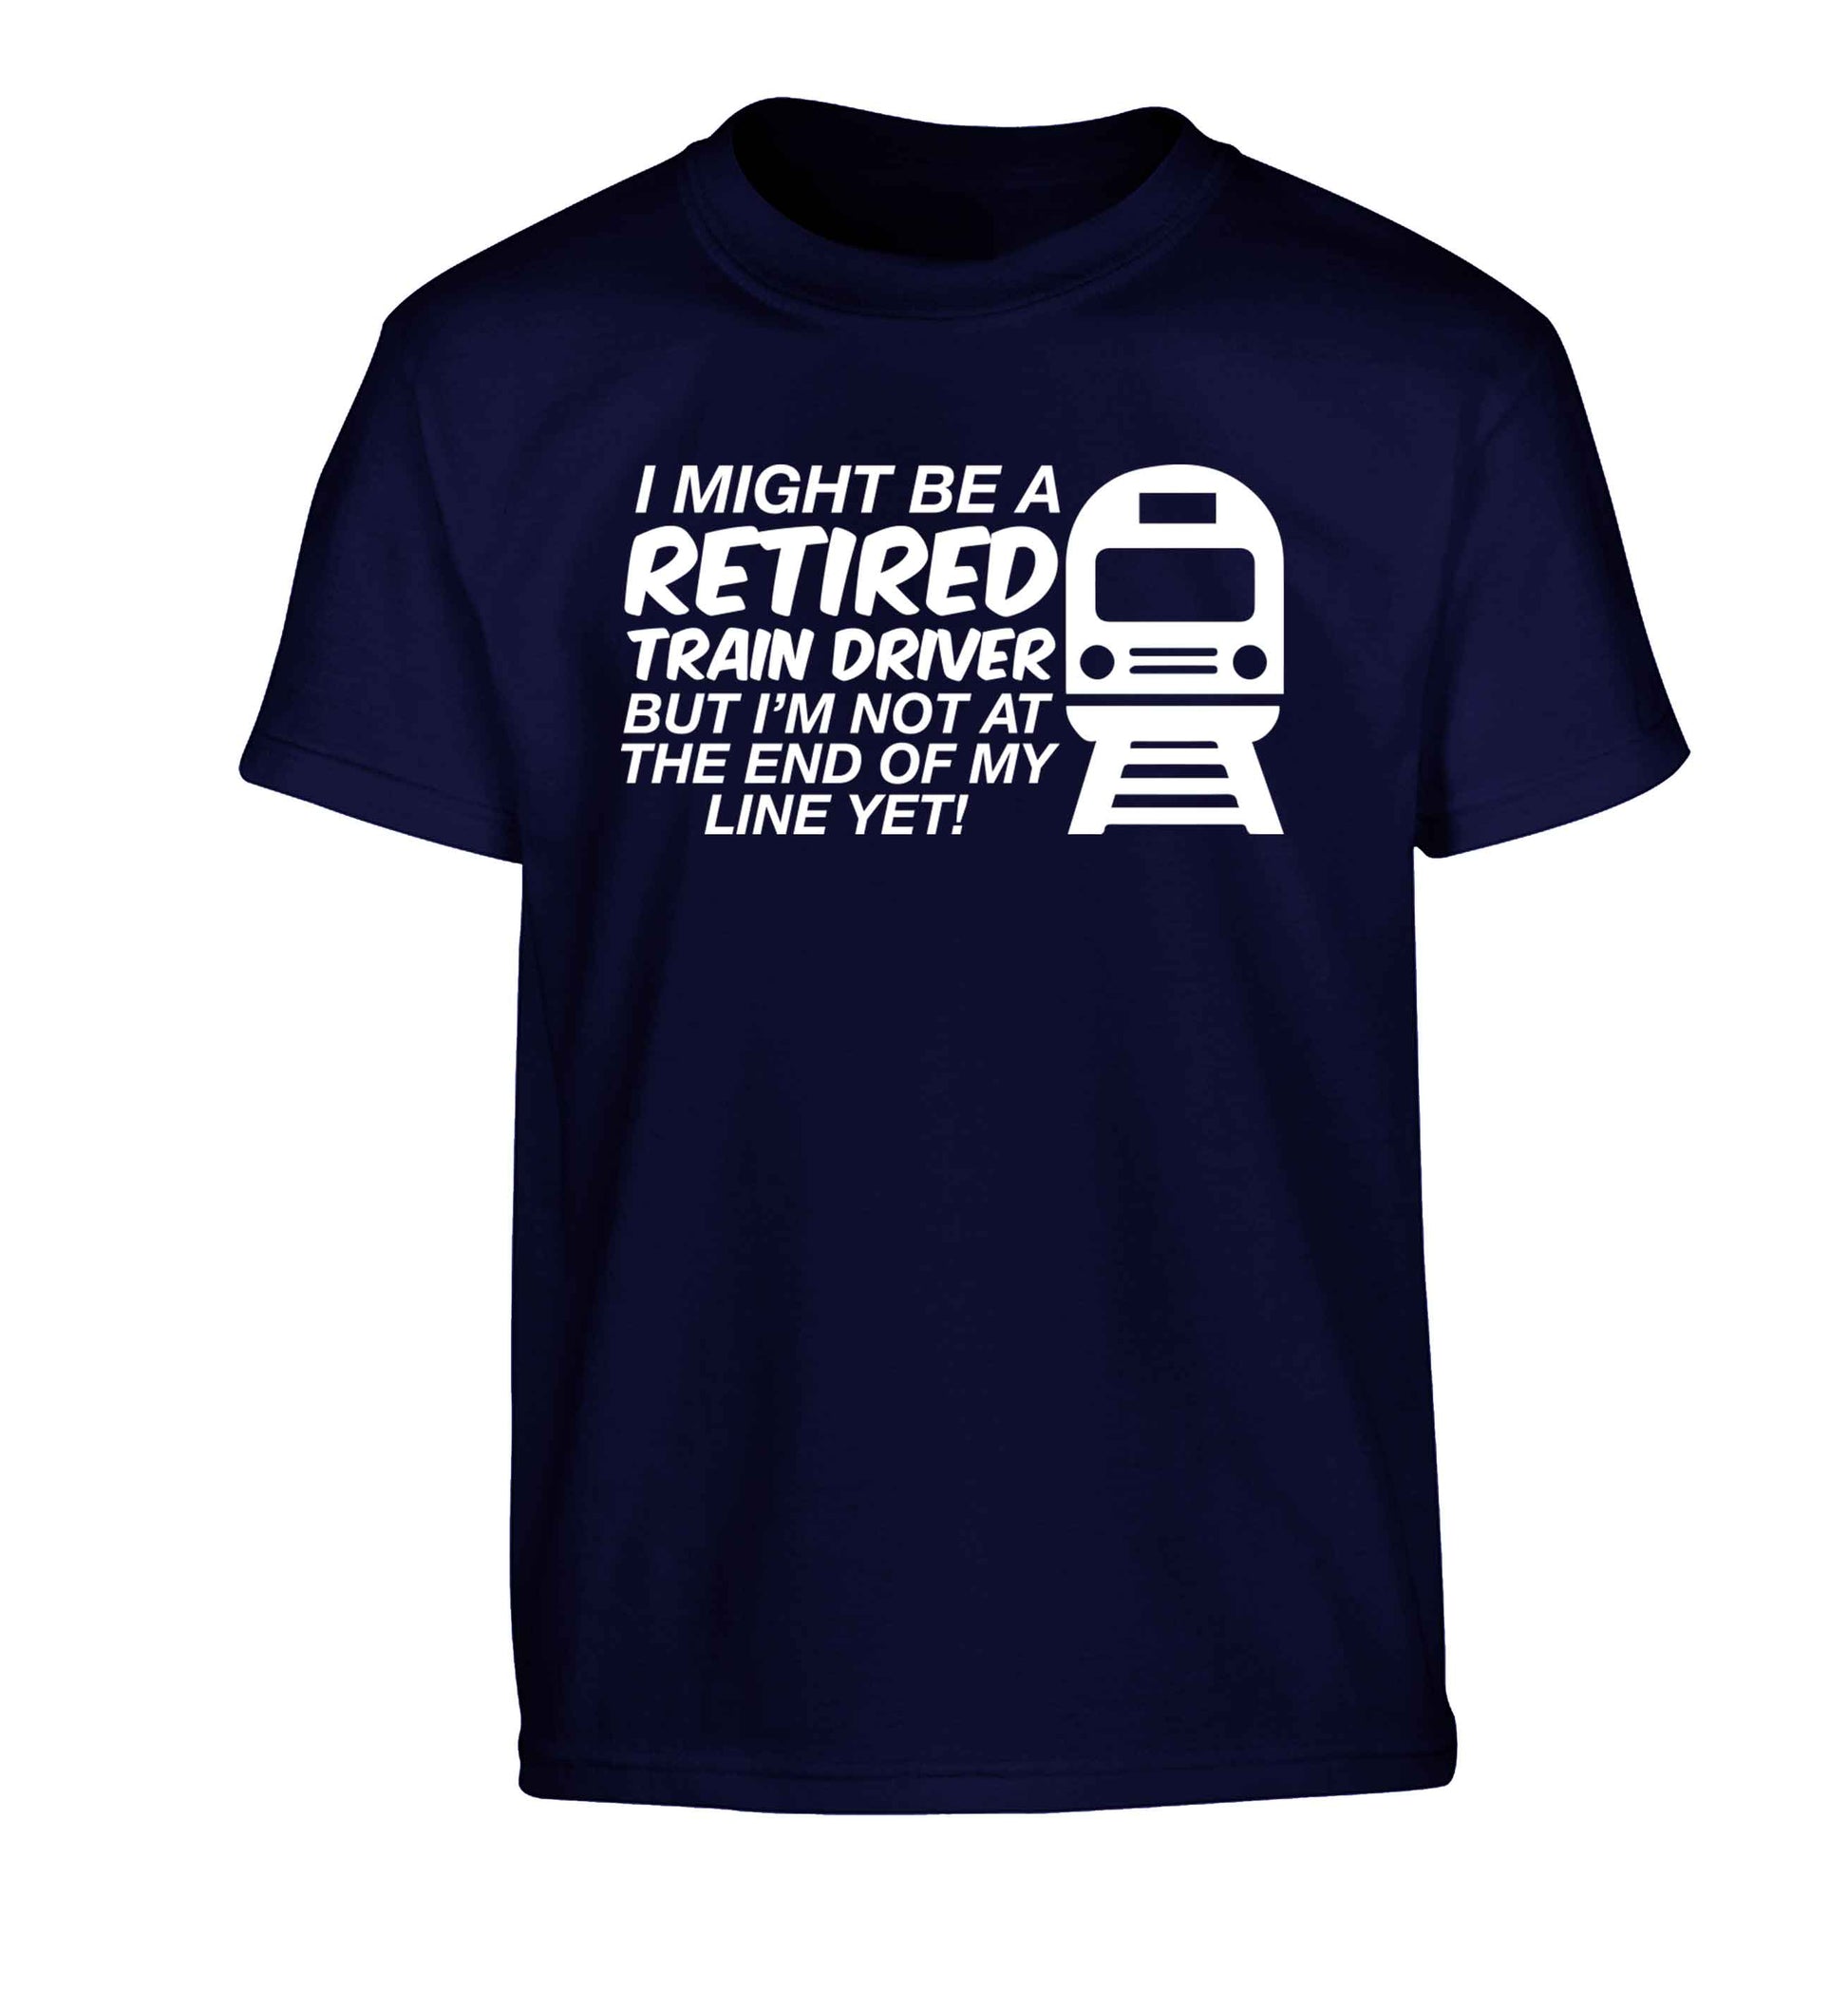 Retired train driver but I'm not at the end of my line yet Children's navy Tshirt 12-13 Years